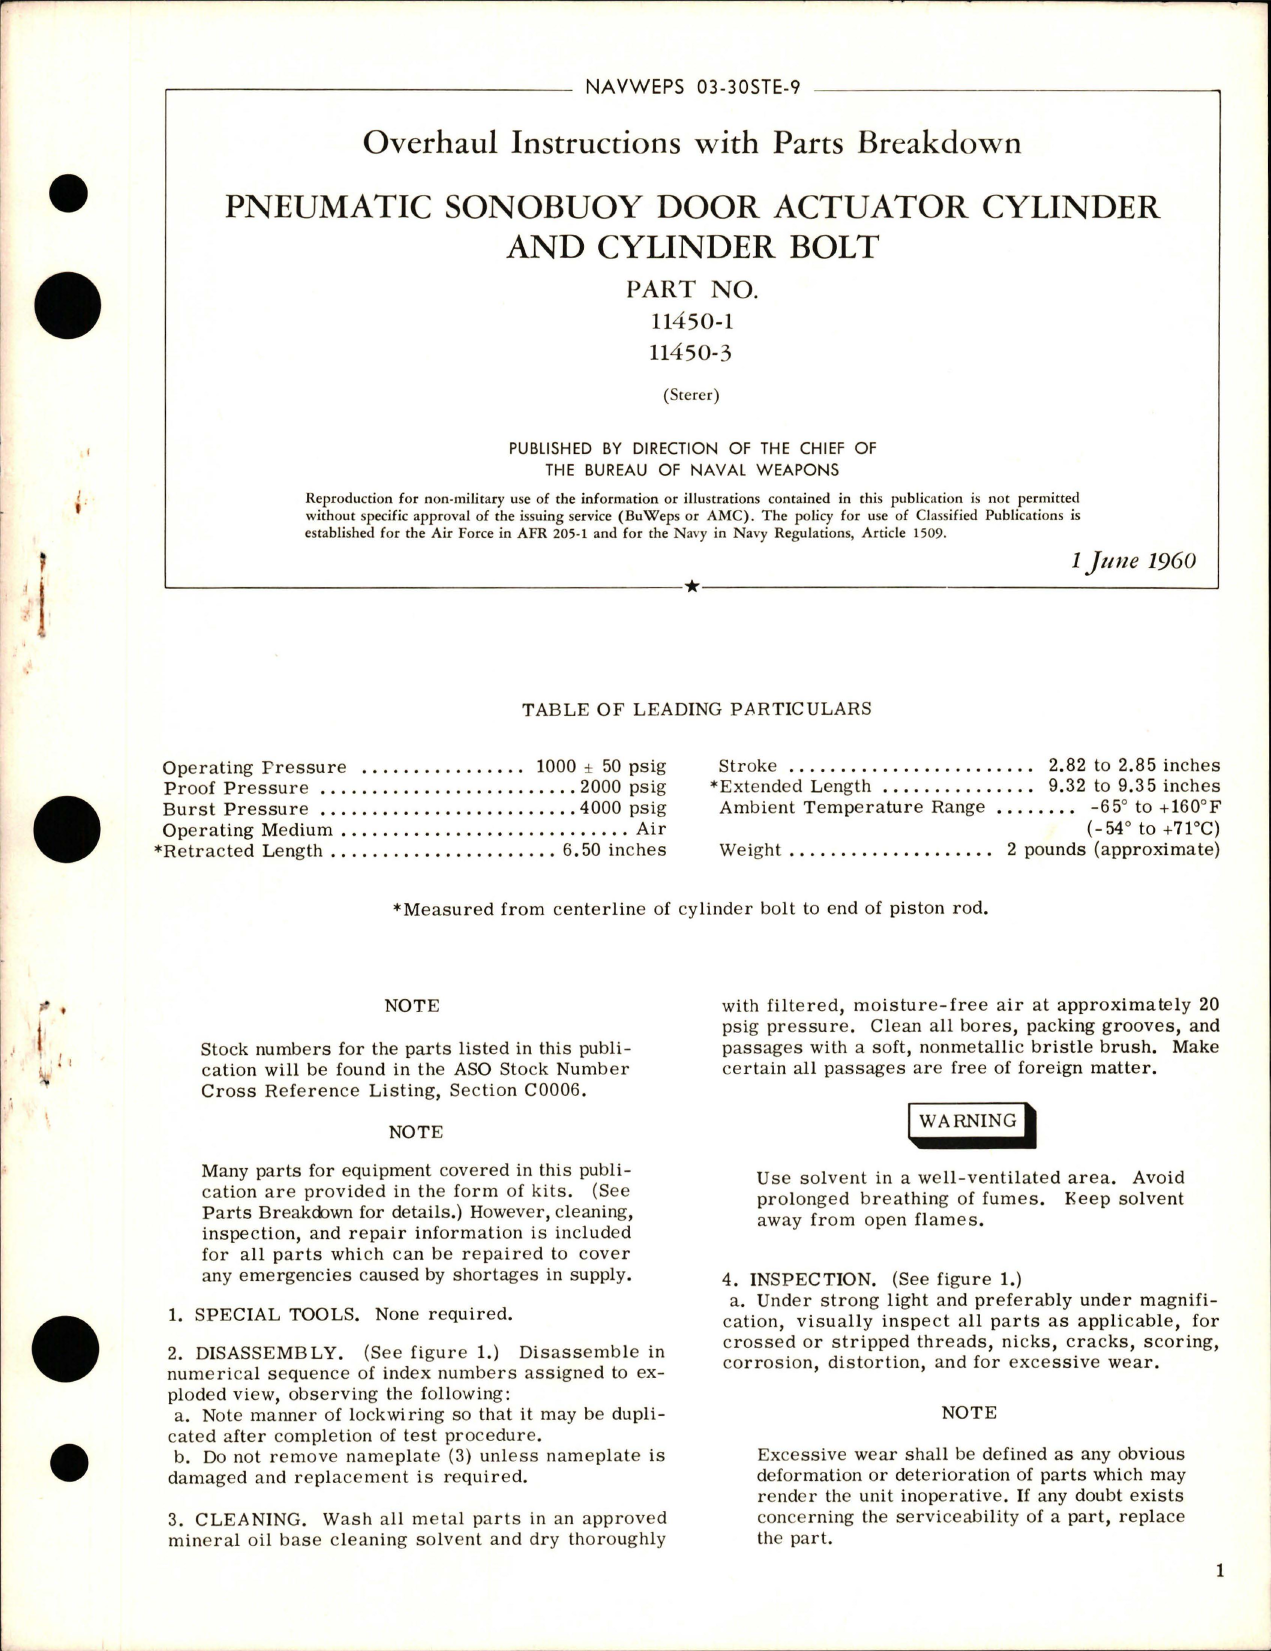 Sample page 1 from AirCorps Library document: Overhaul Instructions with Parts Breakdown for Pneumatic Sonobuoy Door Actuator Cylinder & Cylinder Bolt - Part 11450-1 and 11450-3